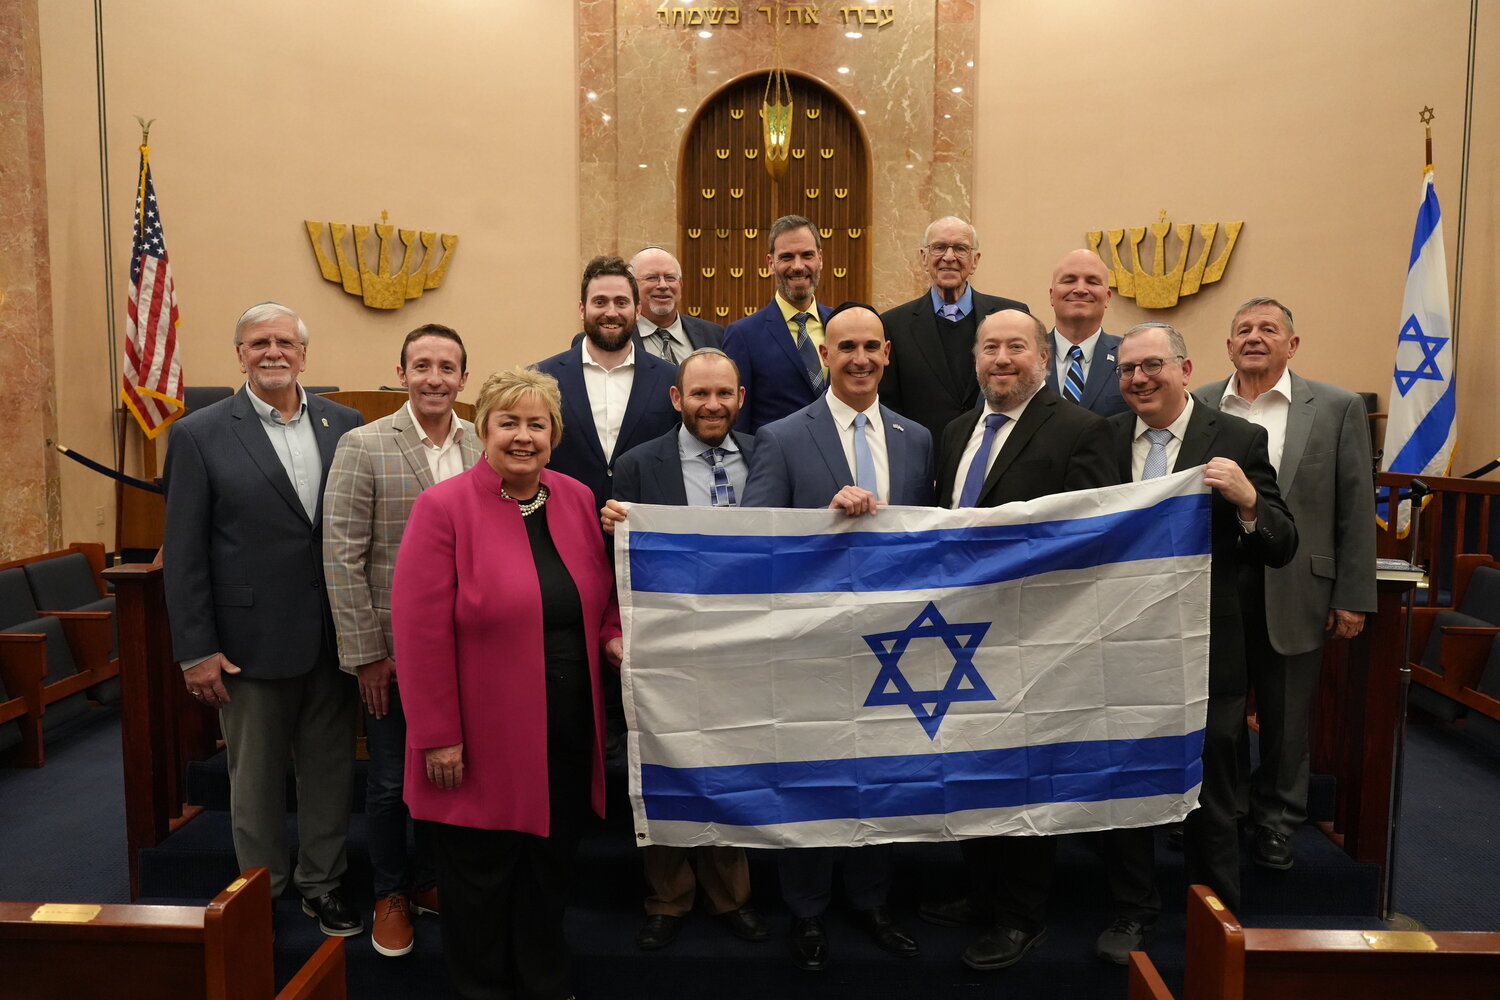 The Merrick-Bellmore Jewish Community Council celebrated Yom Ha’atzmaut, Israel’s Independence Day, with five of the hamlets’ synagogues at the Merrick Jewish Centre. Above, Jewish leaders from the participating congregations, with local elected officials and community leaders.